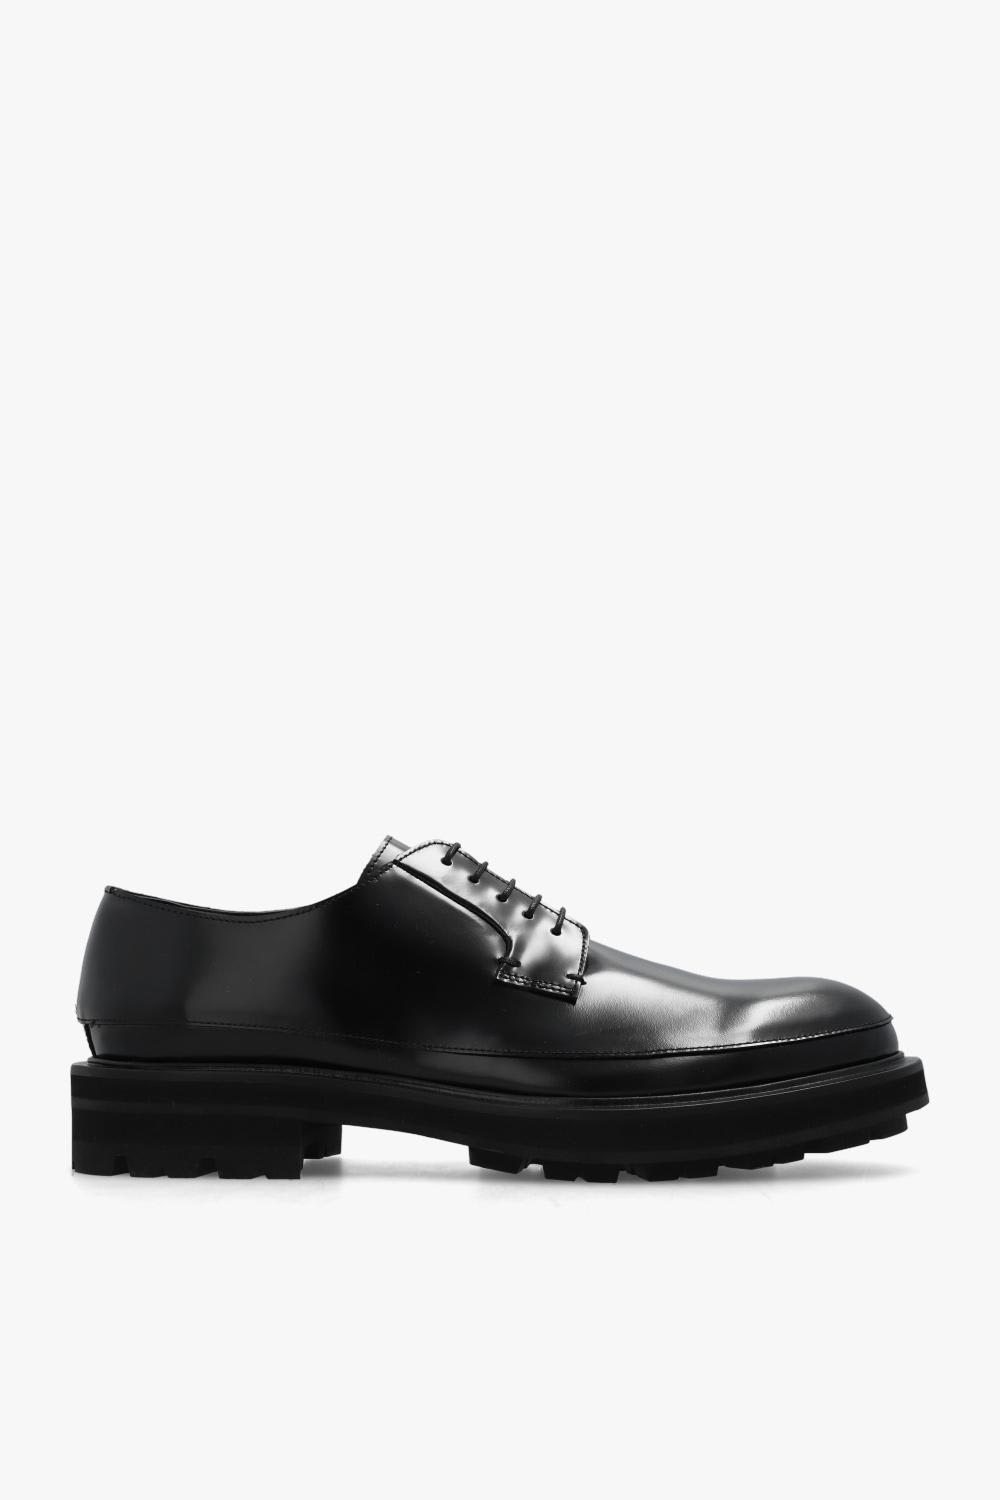 Alexander McQueen Leather Shoes